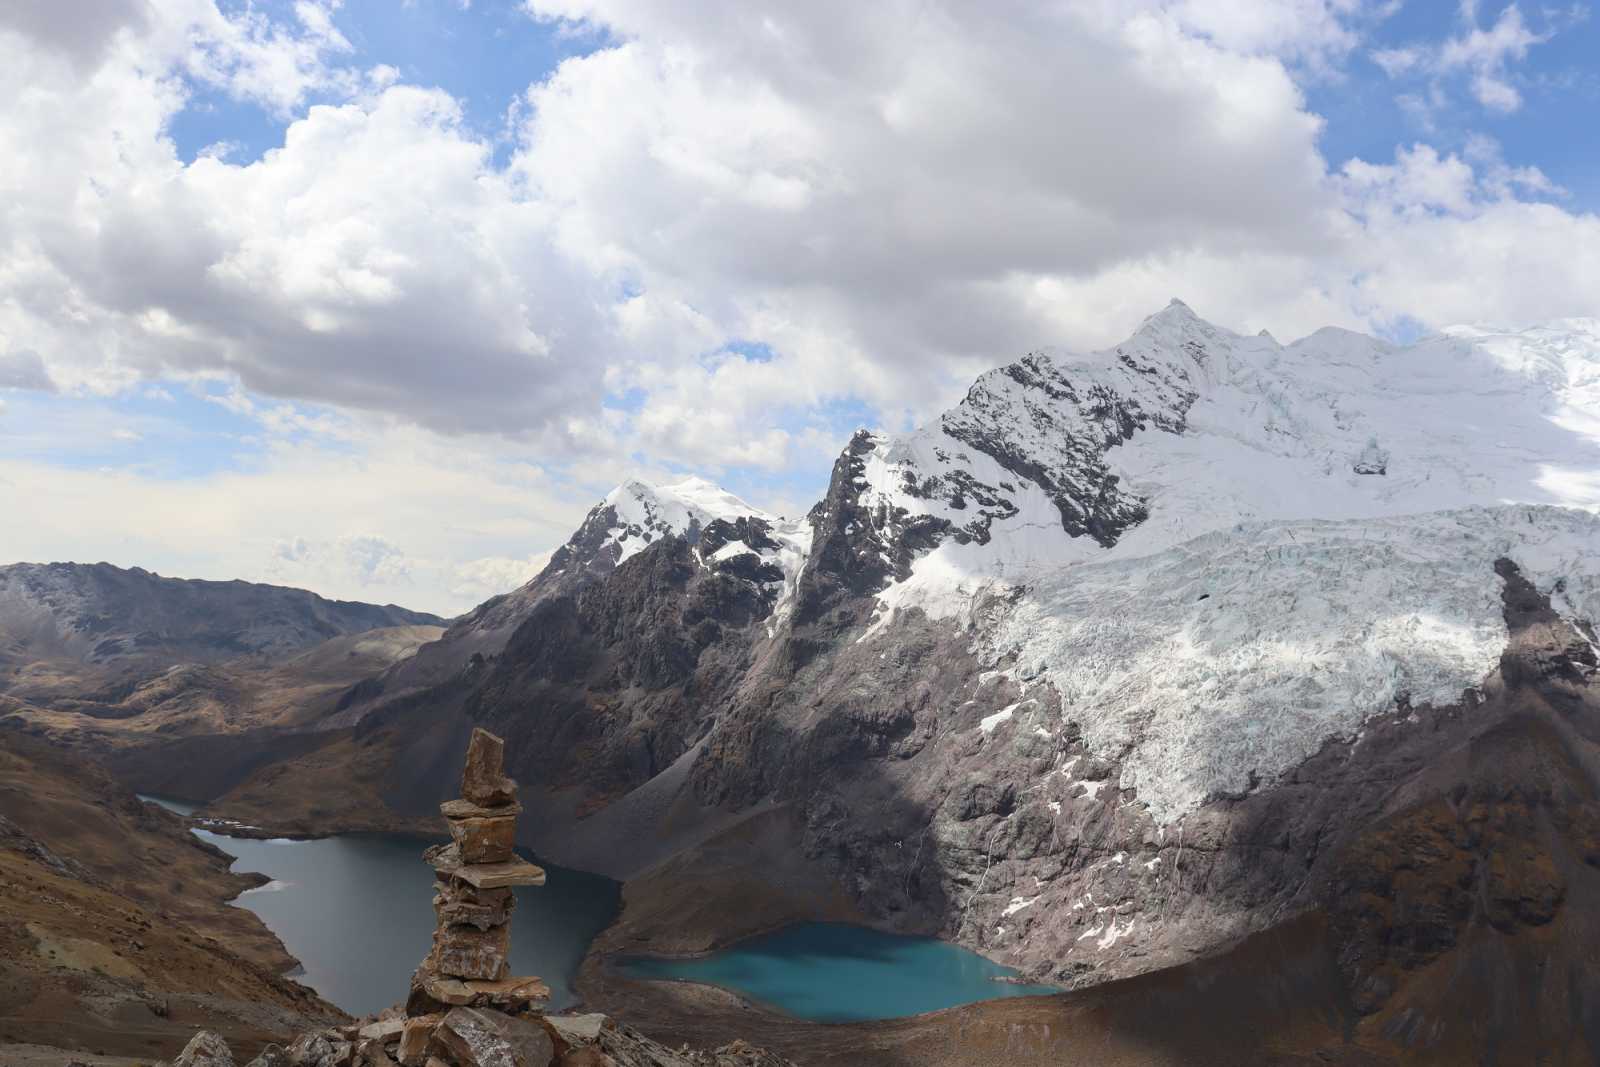 Apacheta Pass is one of the most beautiful passes overlooking the lagoons.